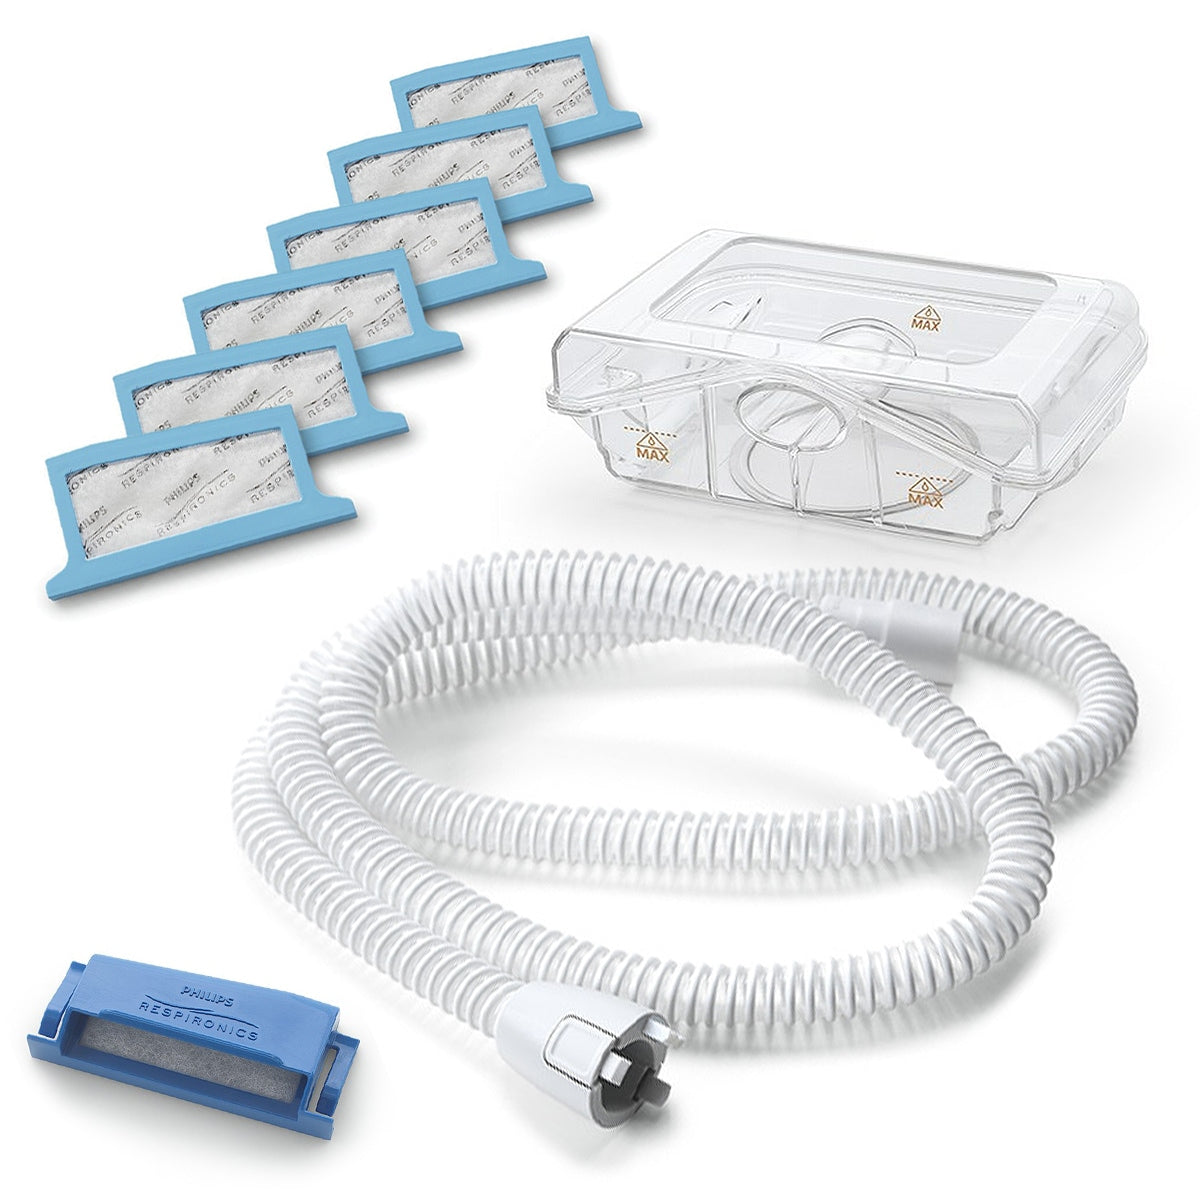 Philips Respironics Premium Resupply Package for DreamStation CPAP & BiPAP Machines